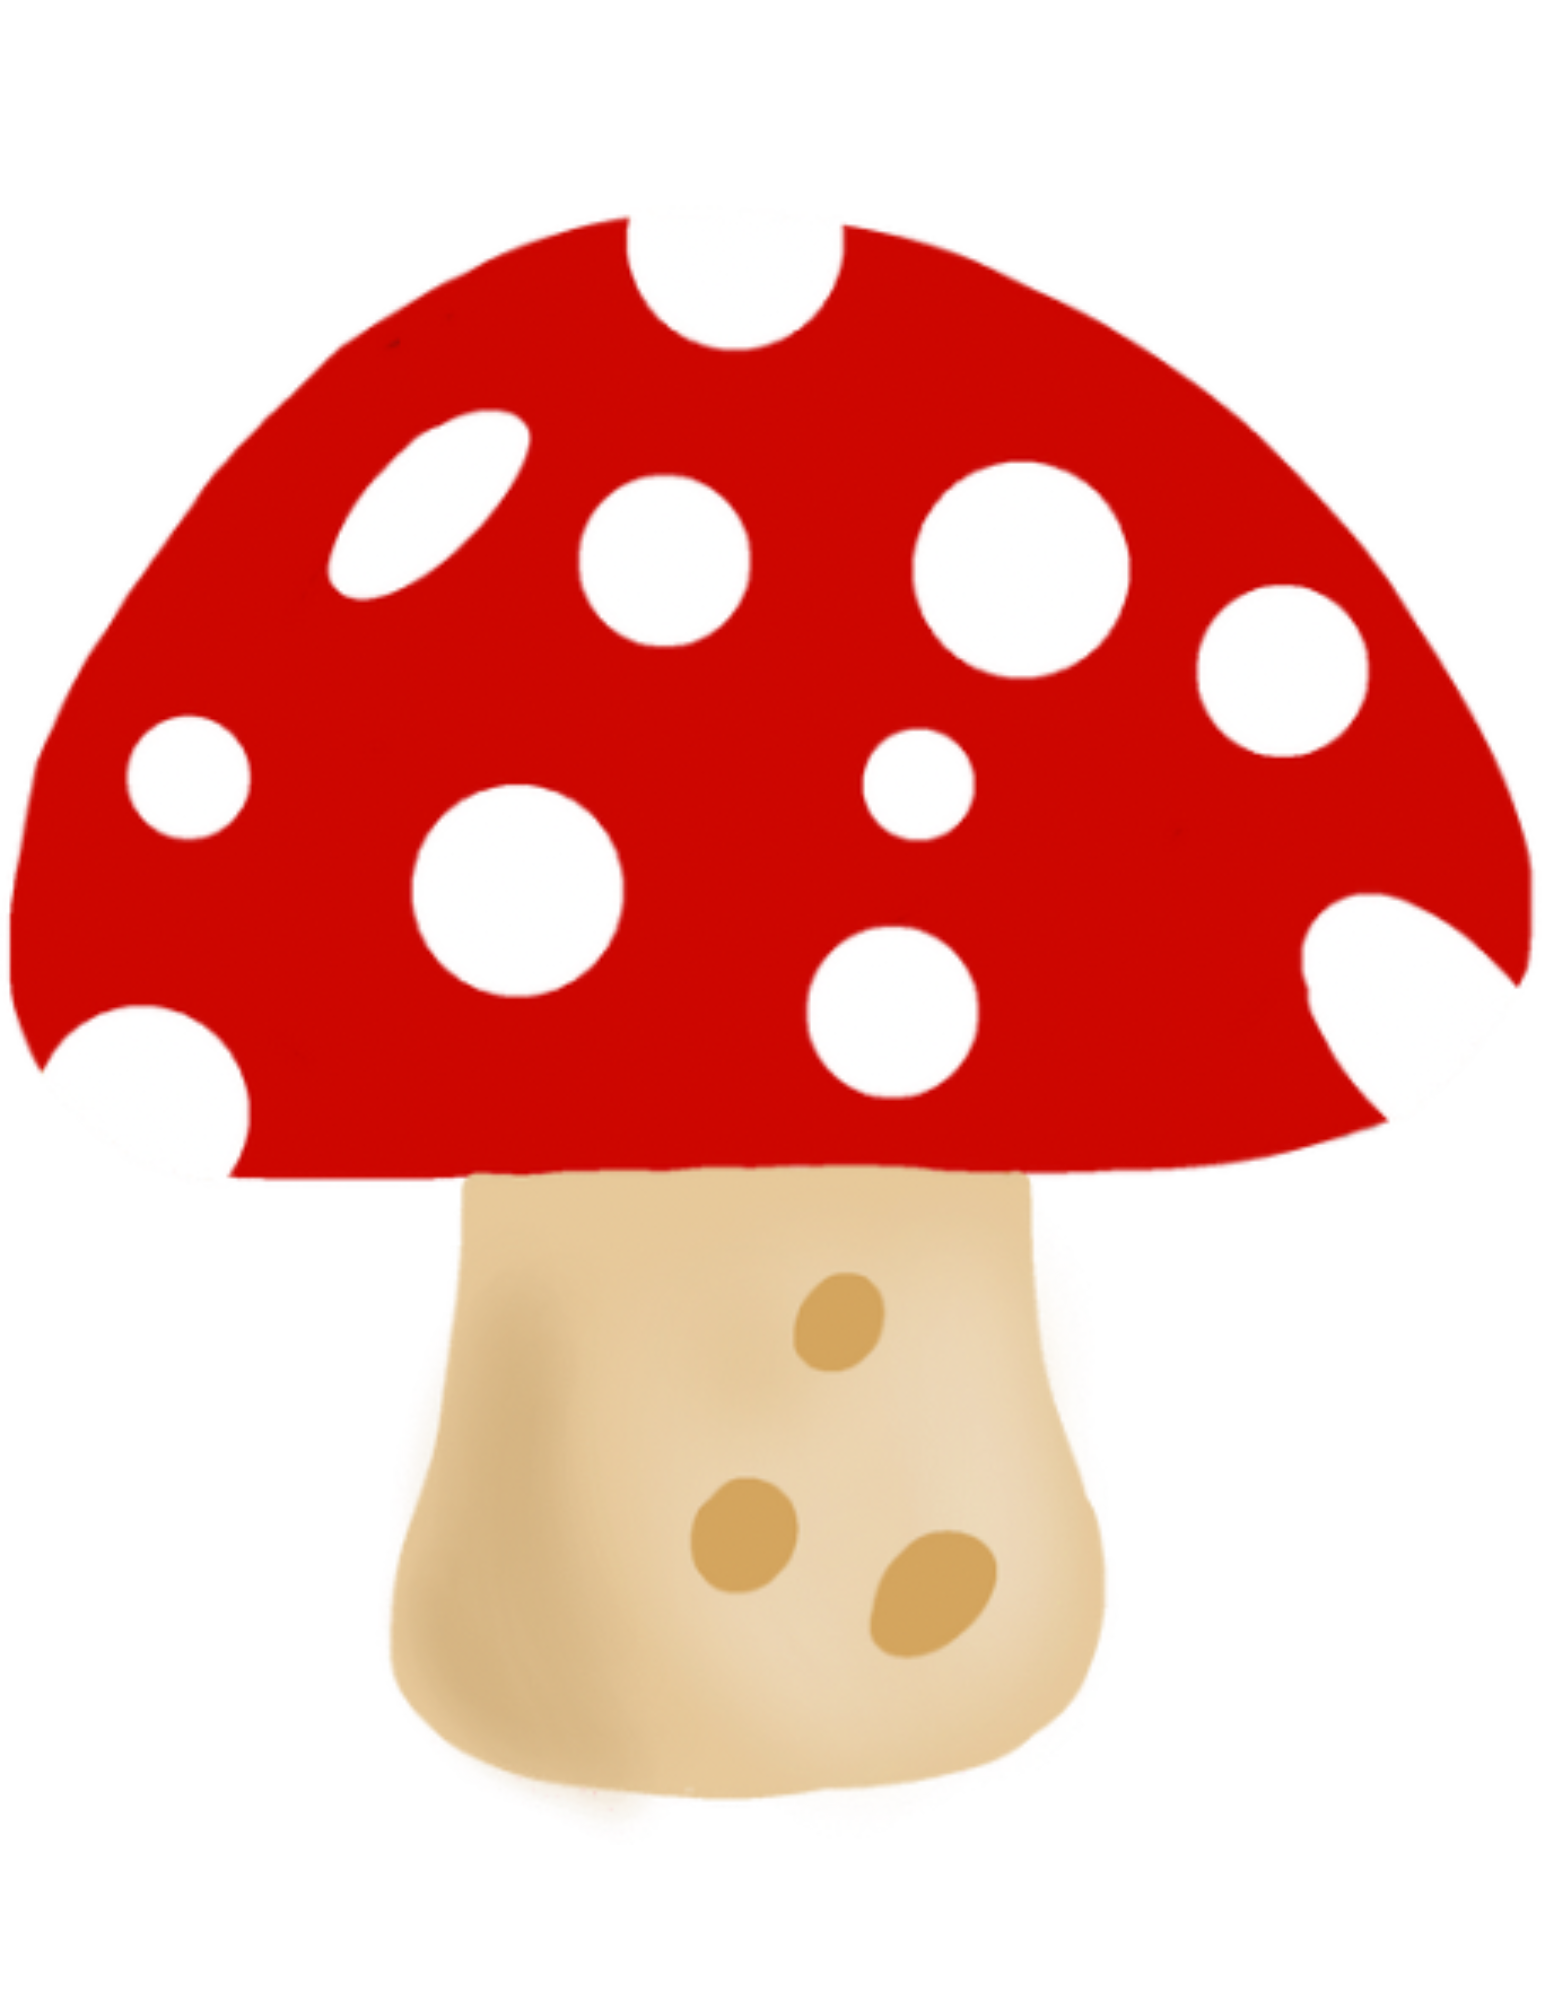 mushroom with red top with white spots